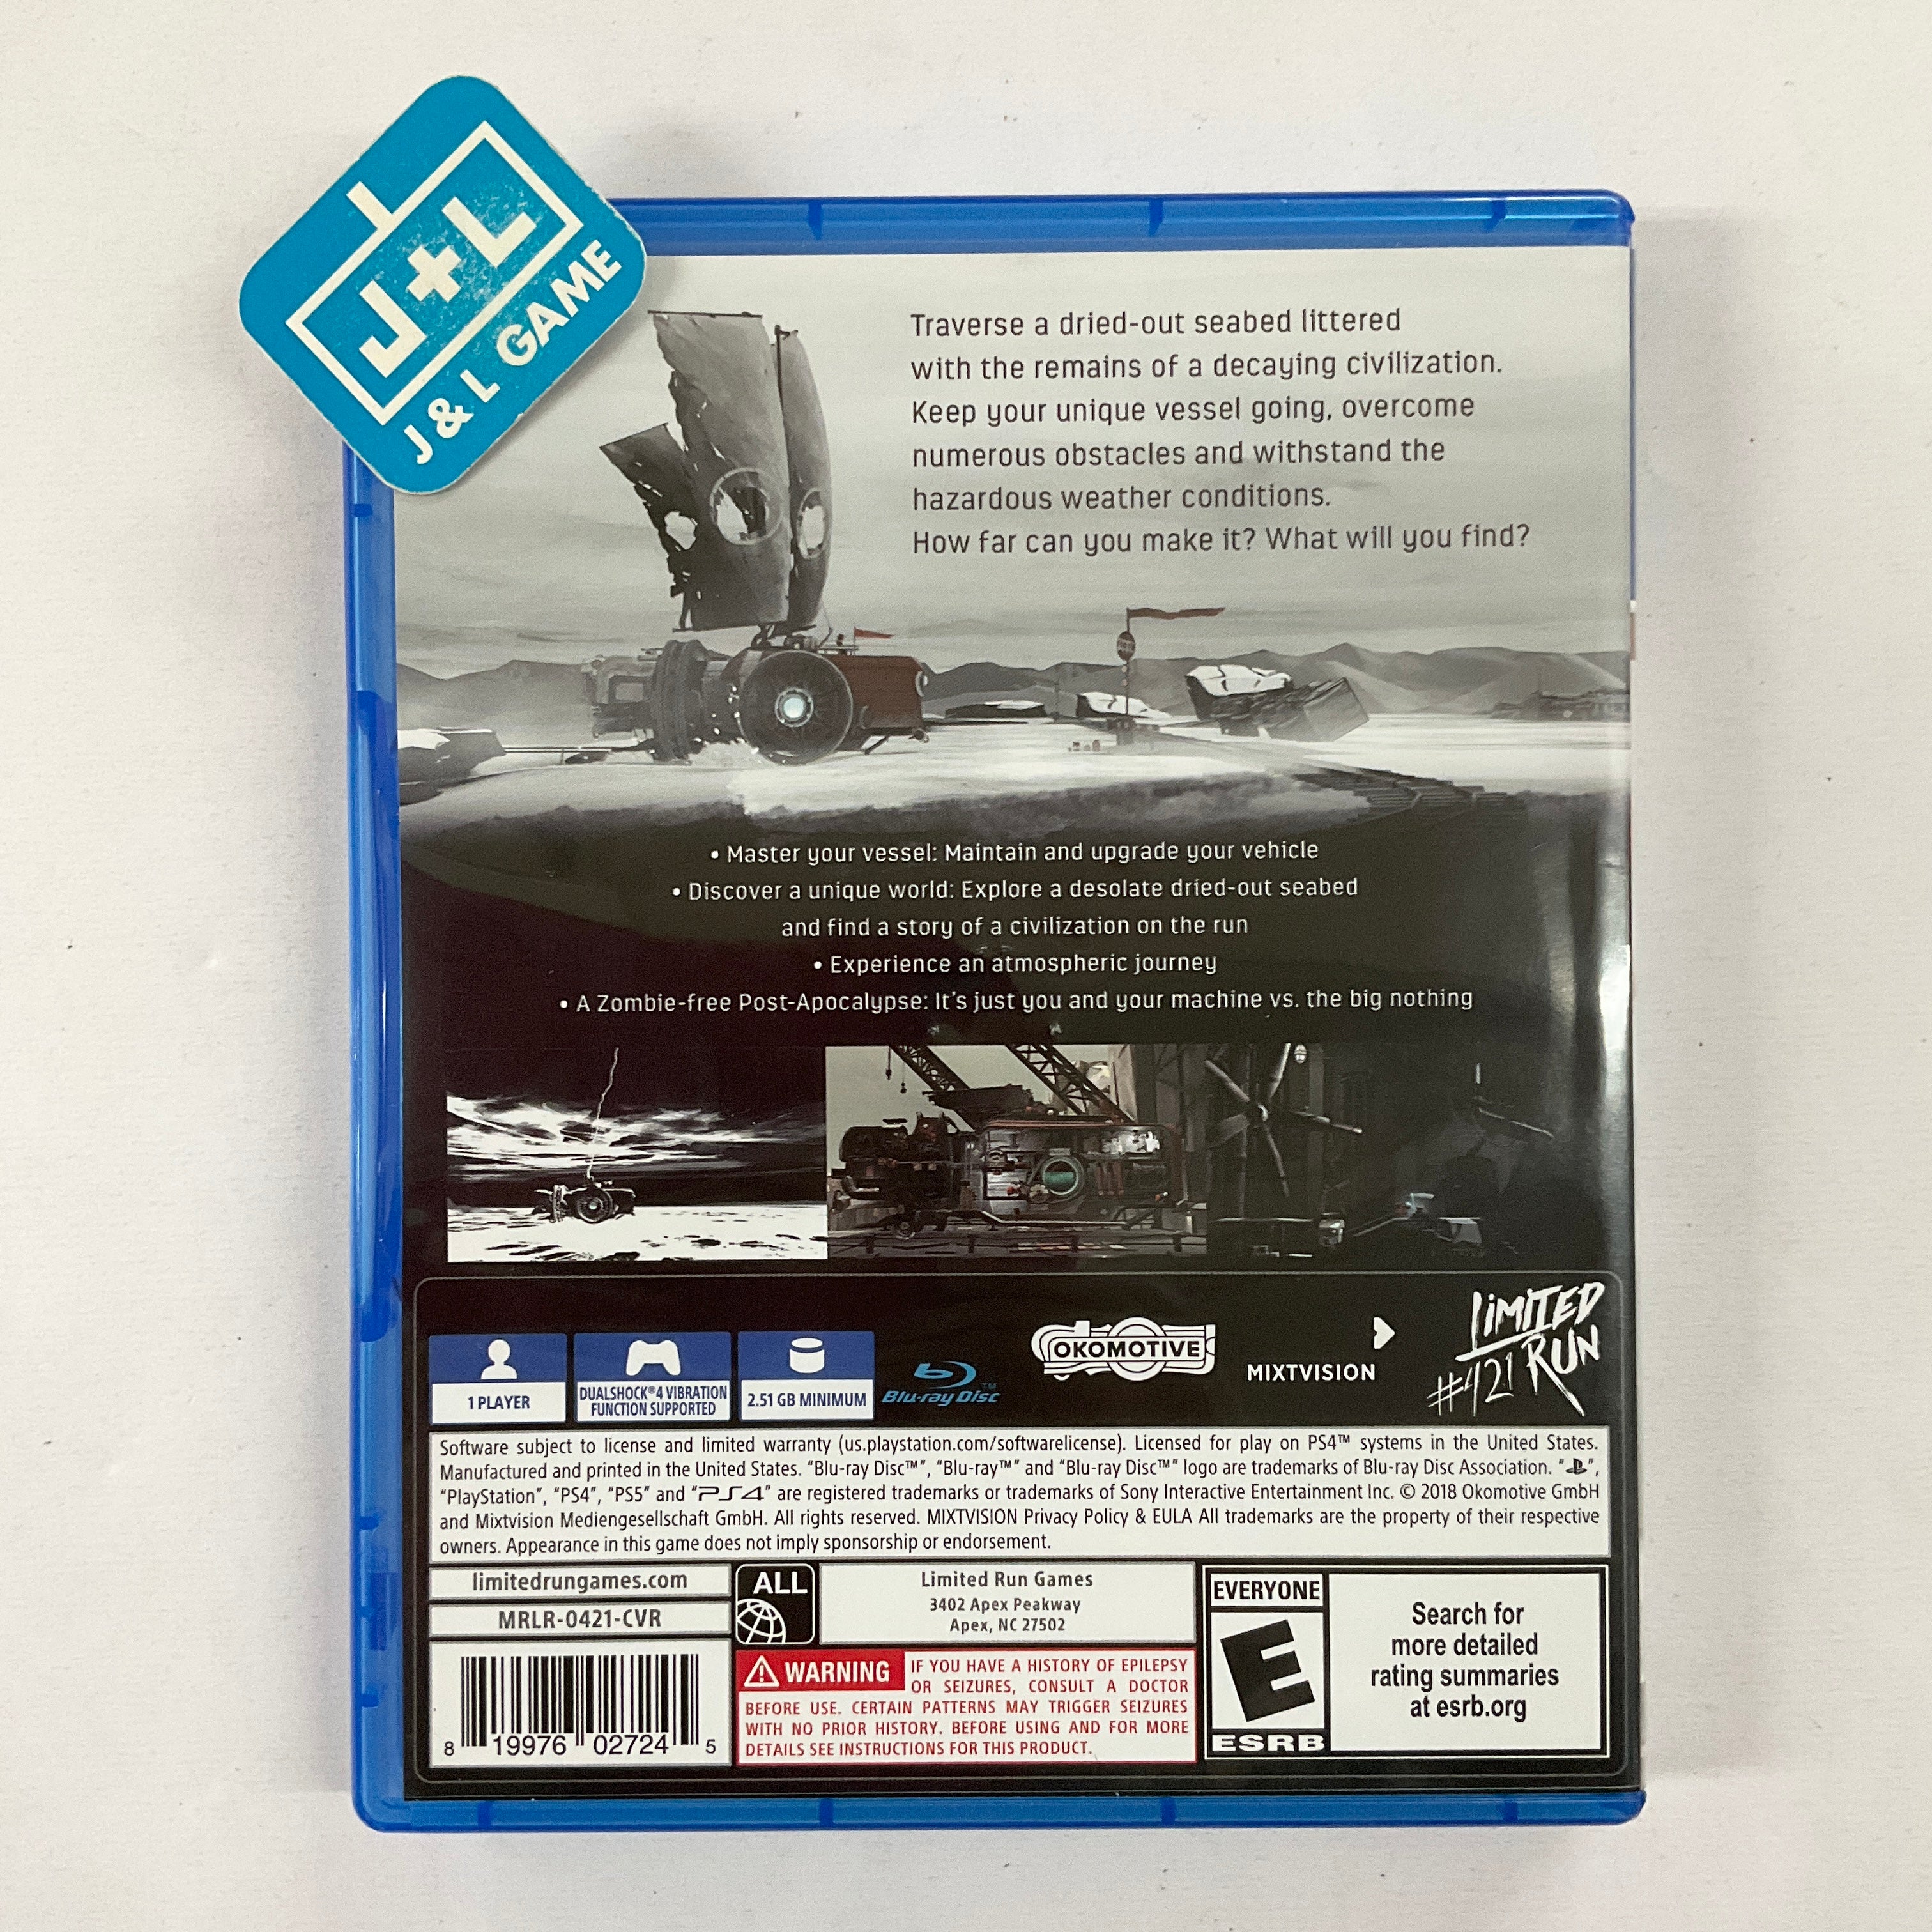 FAR: Lone Sails (Limited Run #421) - (PS4) PlayStation 4 [Pre-Owned] Video Games Limited Run Games   